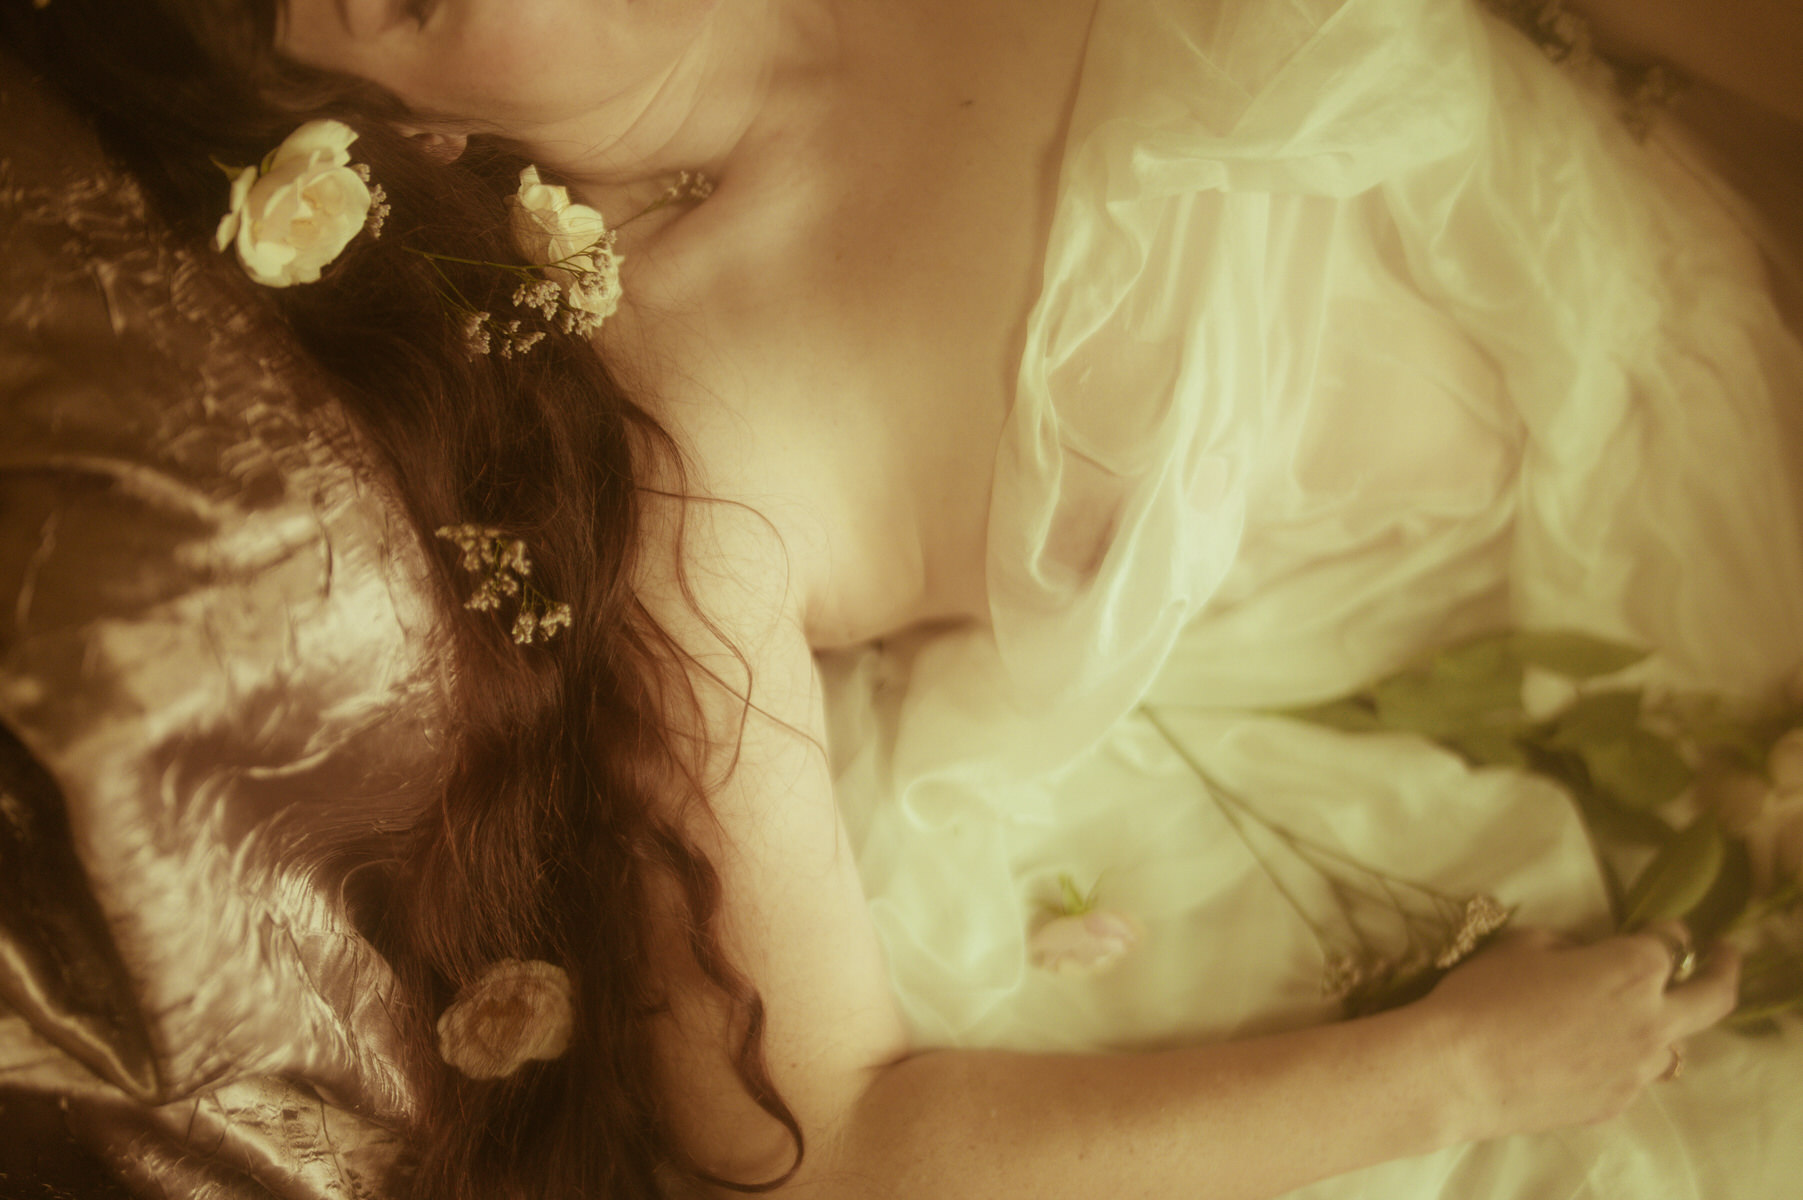 A woman in a boudoir photography setting, laying on a bed with flowers in her hair.